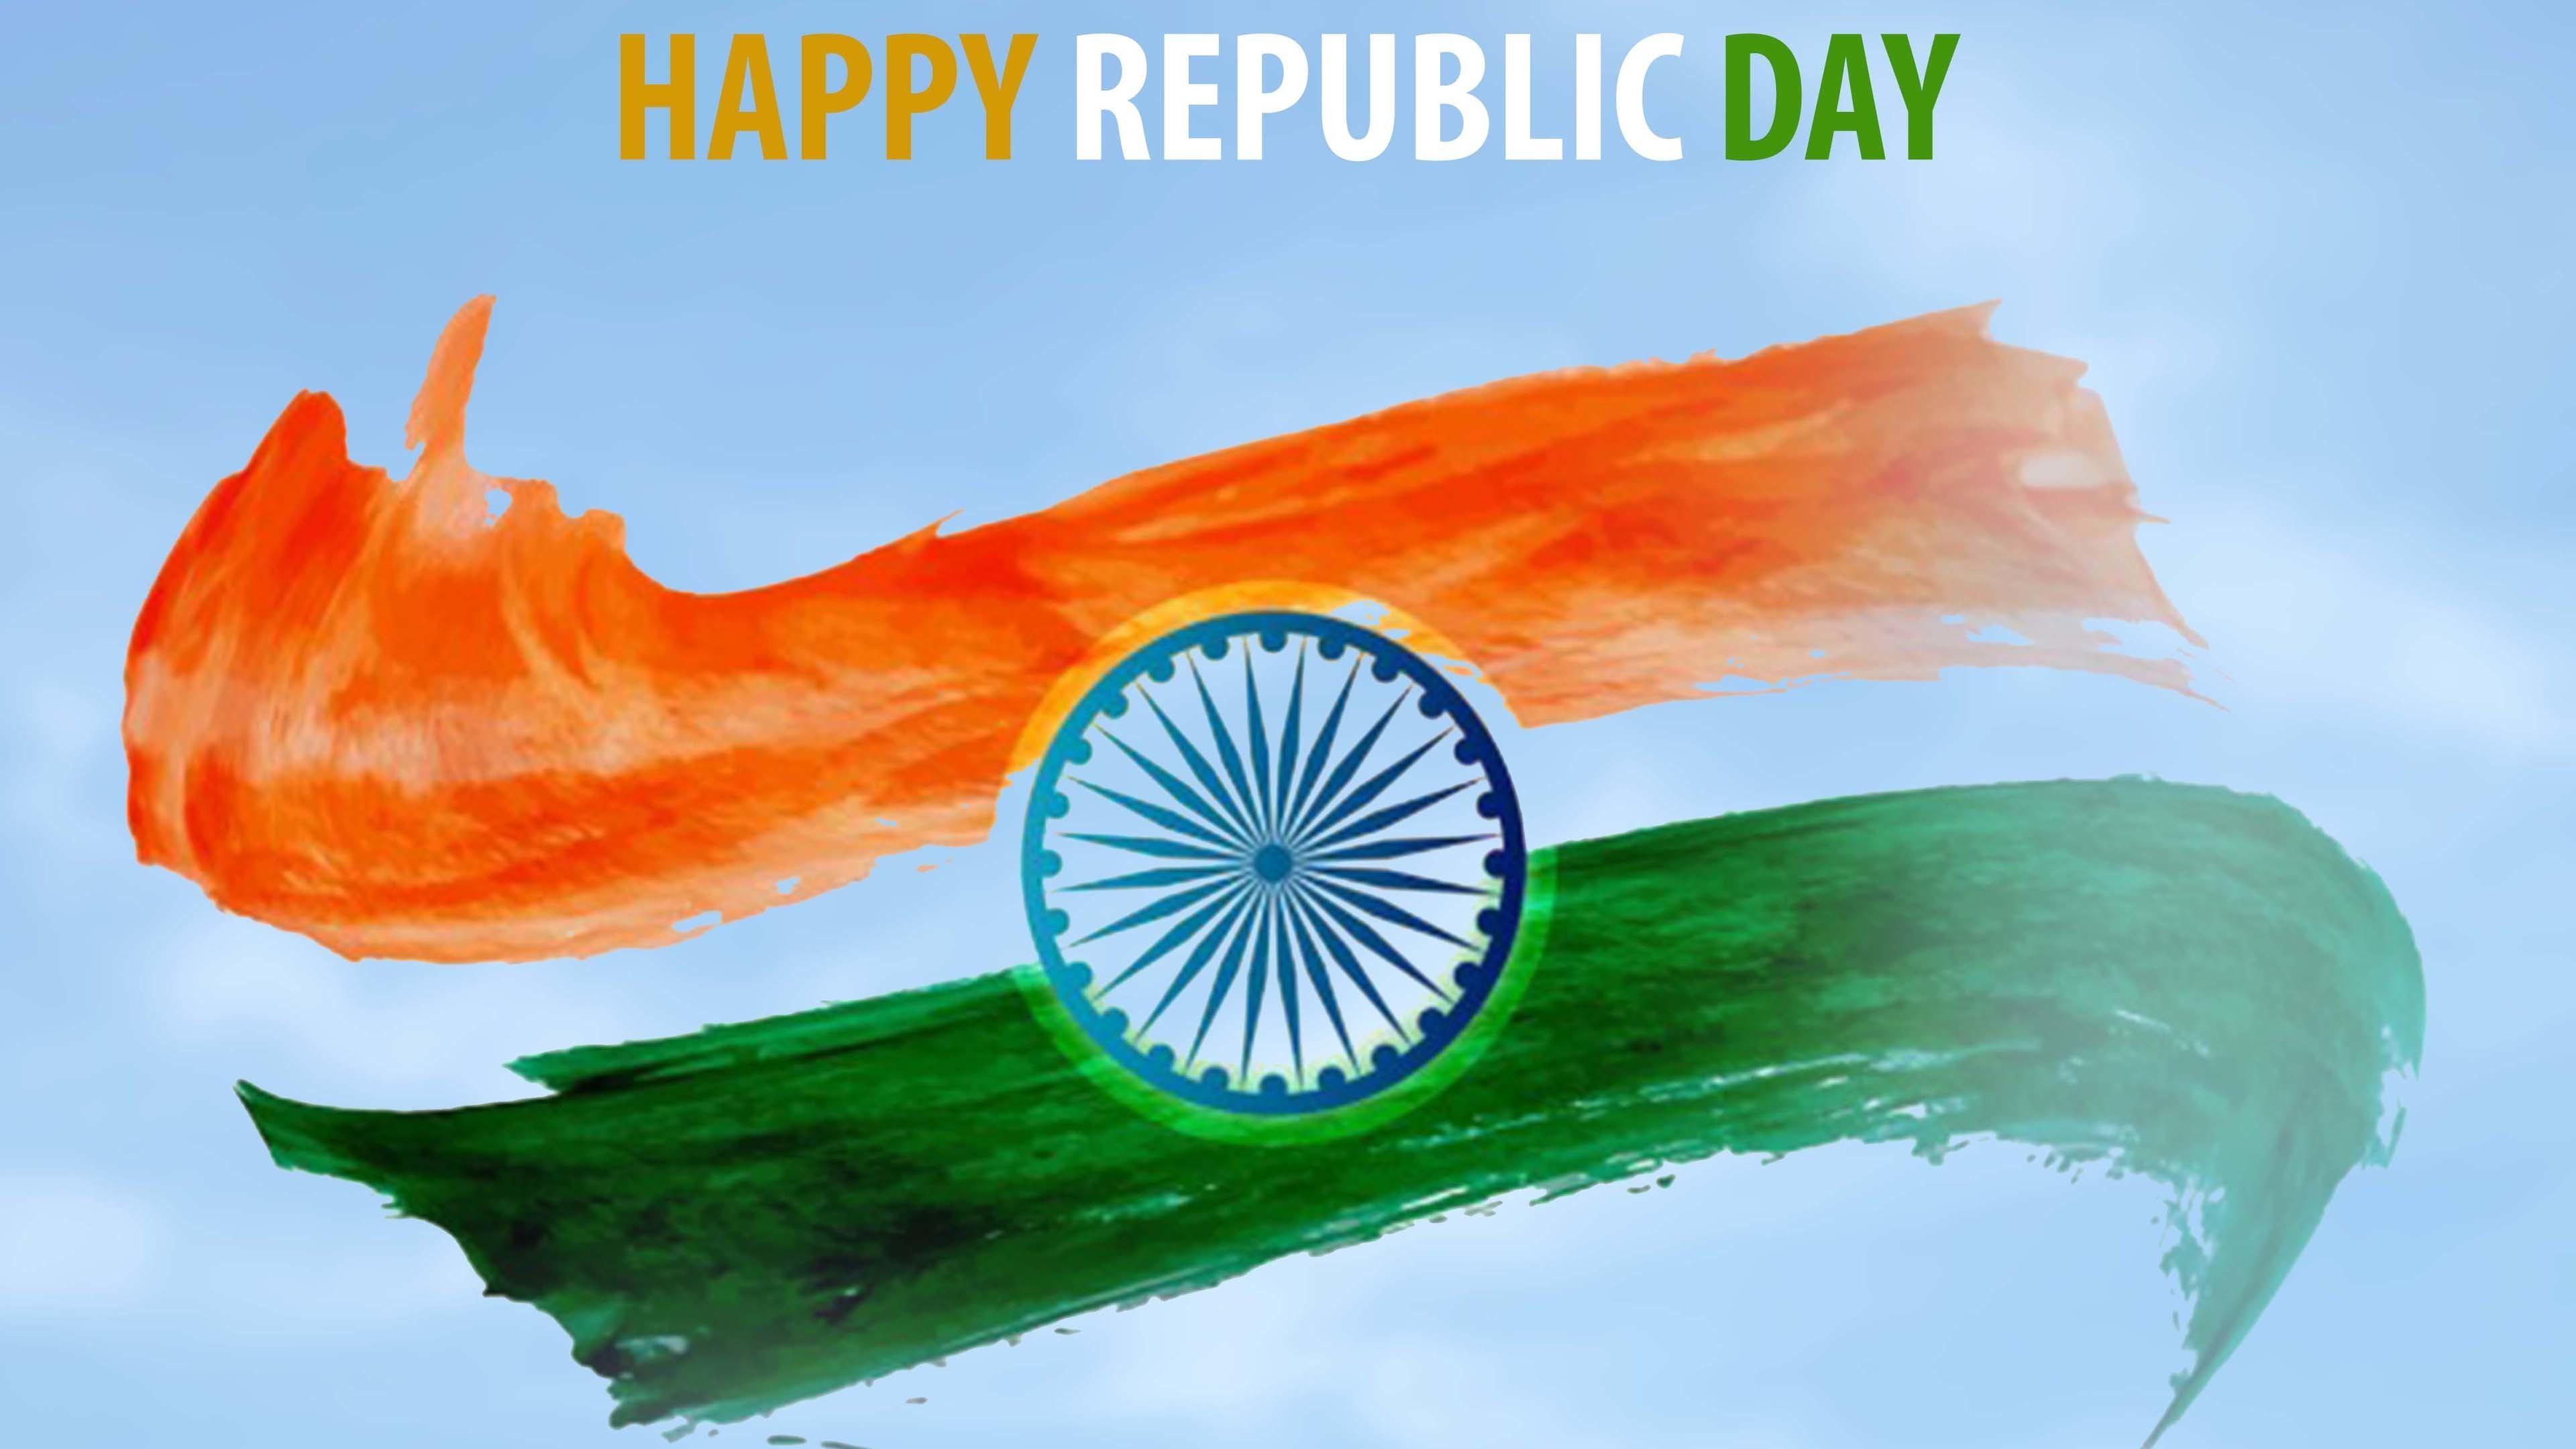 Happy Republic Day With Colors Of Indian Flag HD Republic Day Wallpapers   HD Wallpapers  ID 59036